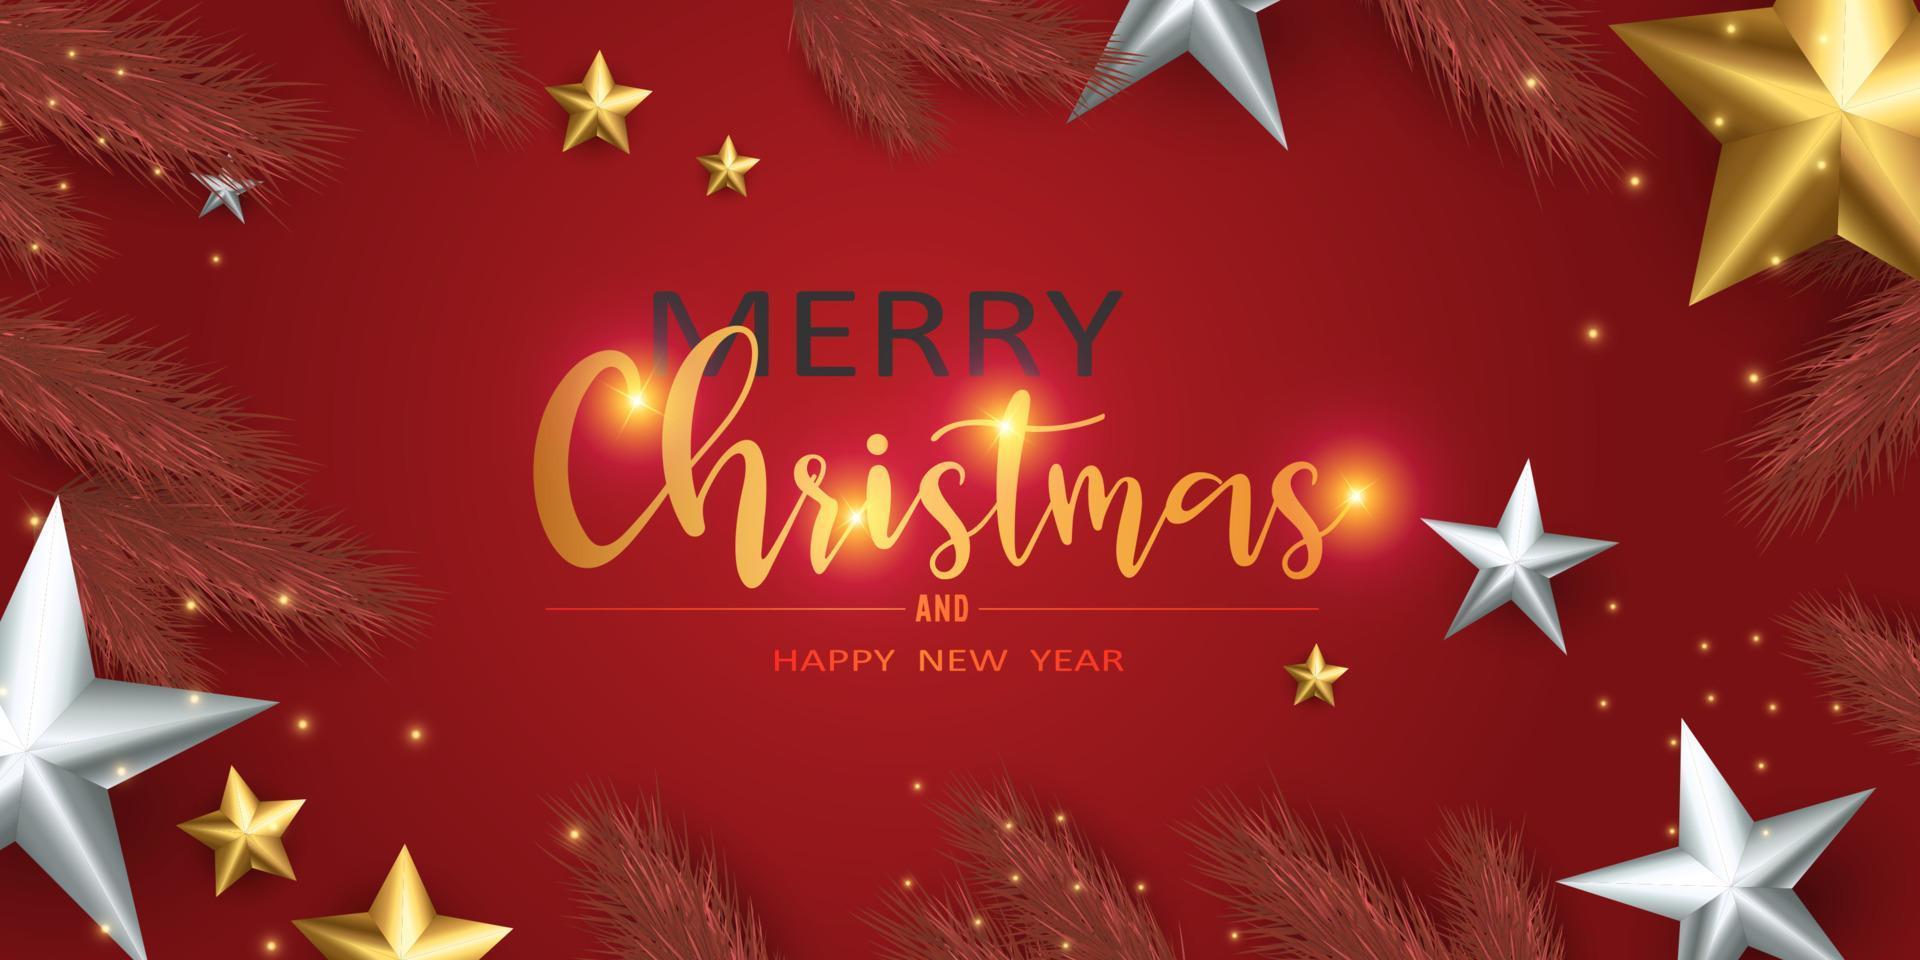 Merry Christmas and Happy New Year. xmas background, banner, frame, header, cover background or greeting card design. red color. vector